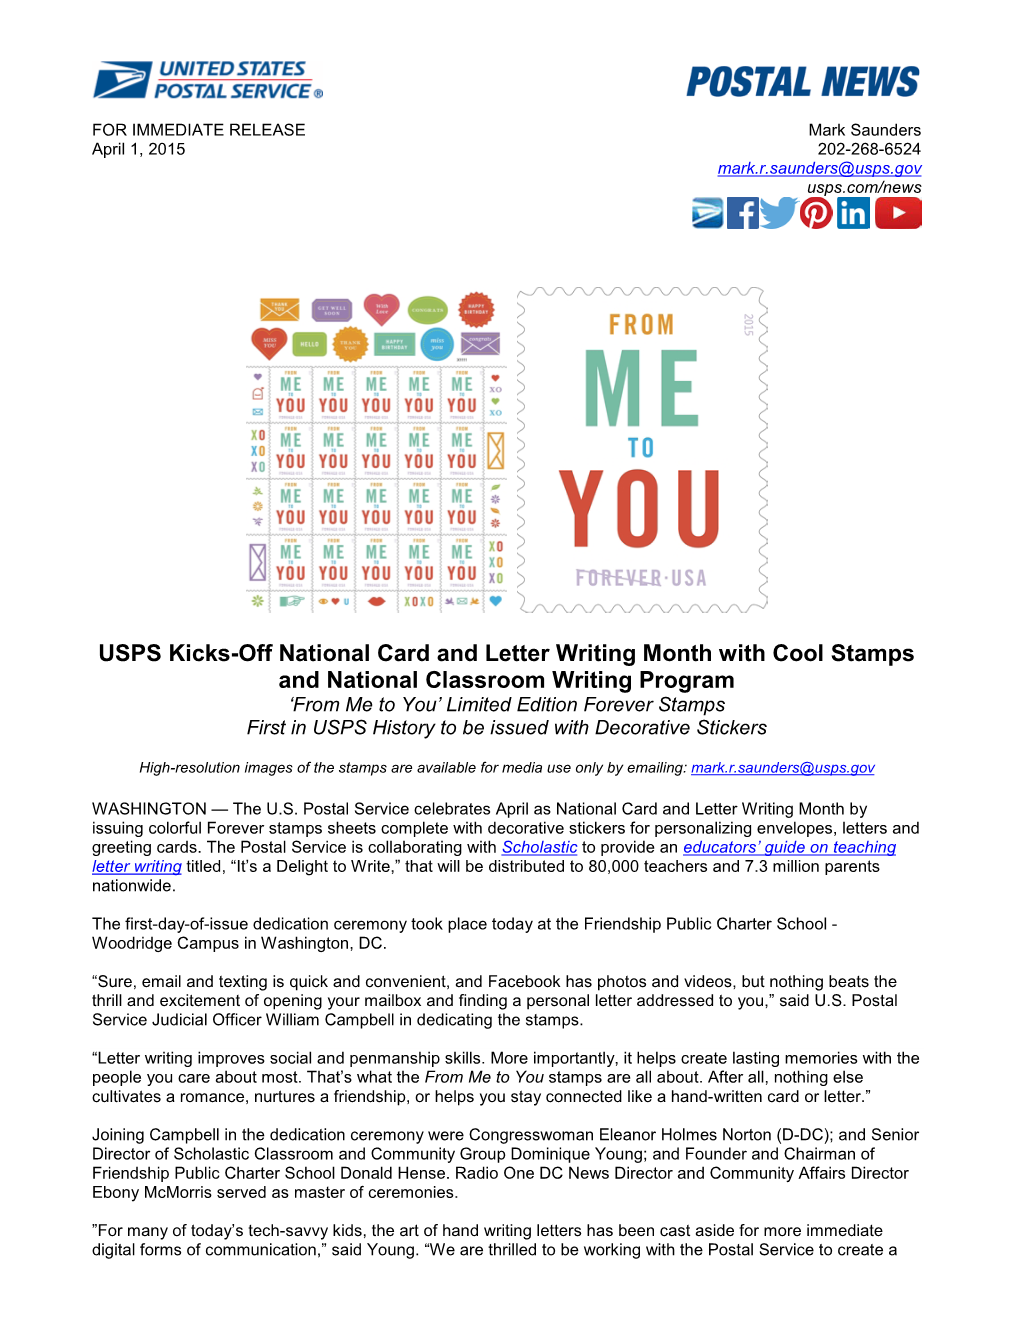 USPS Kicks-Off National Card and Letter Writing Month with Cool